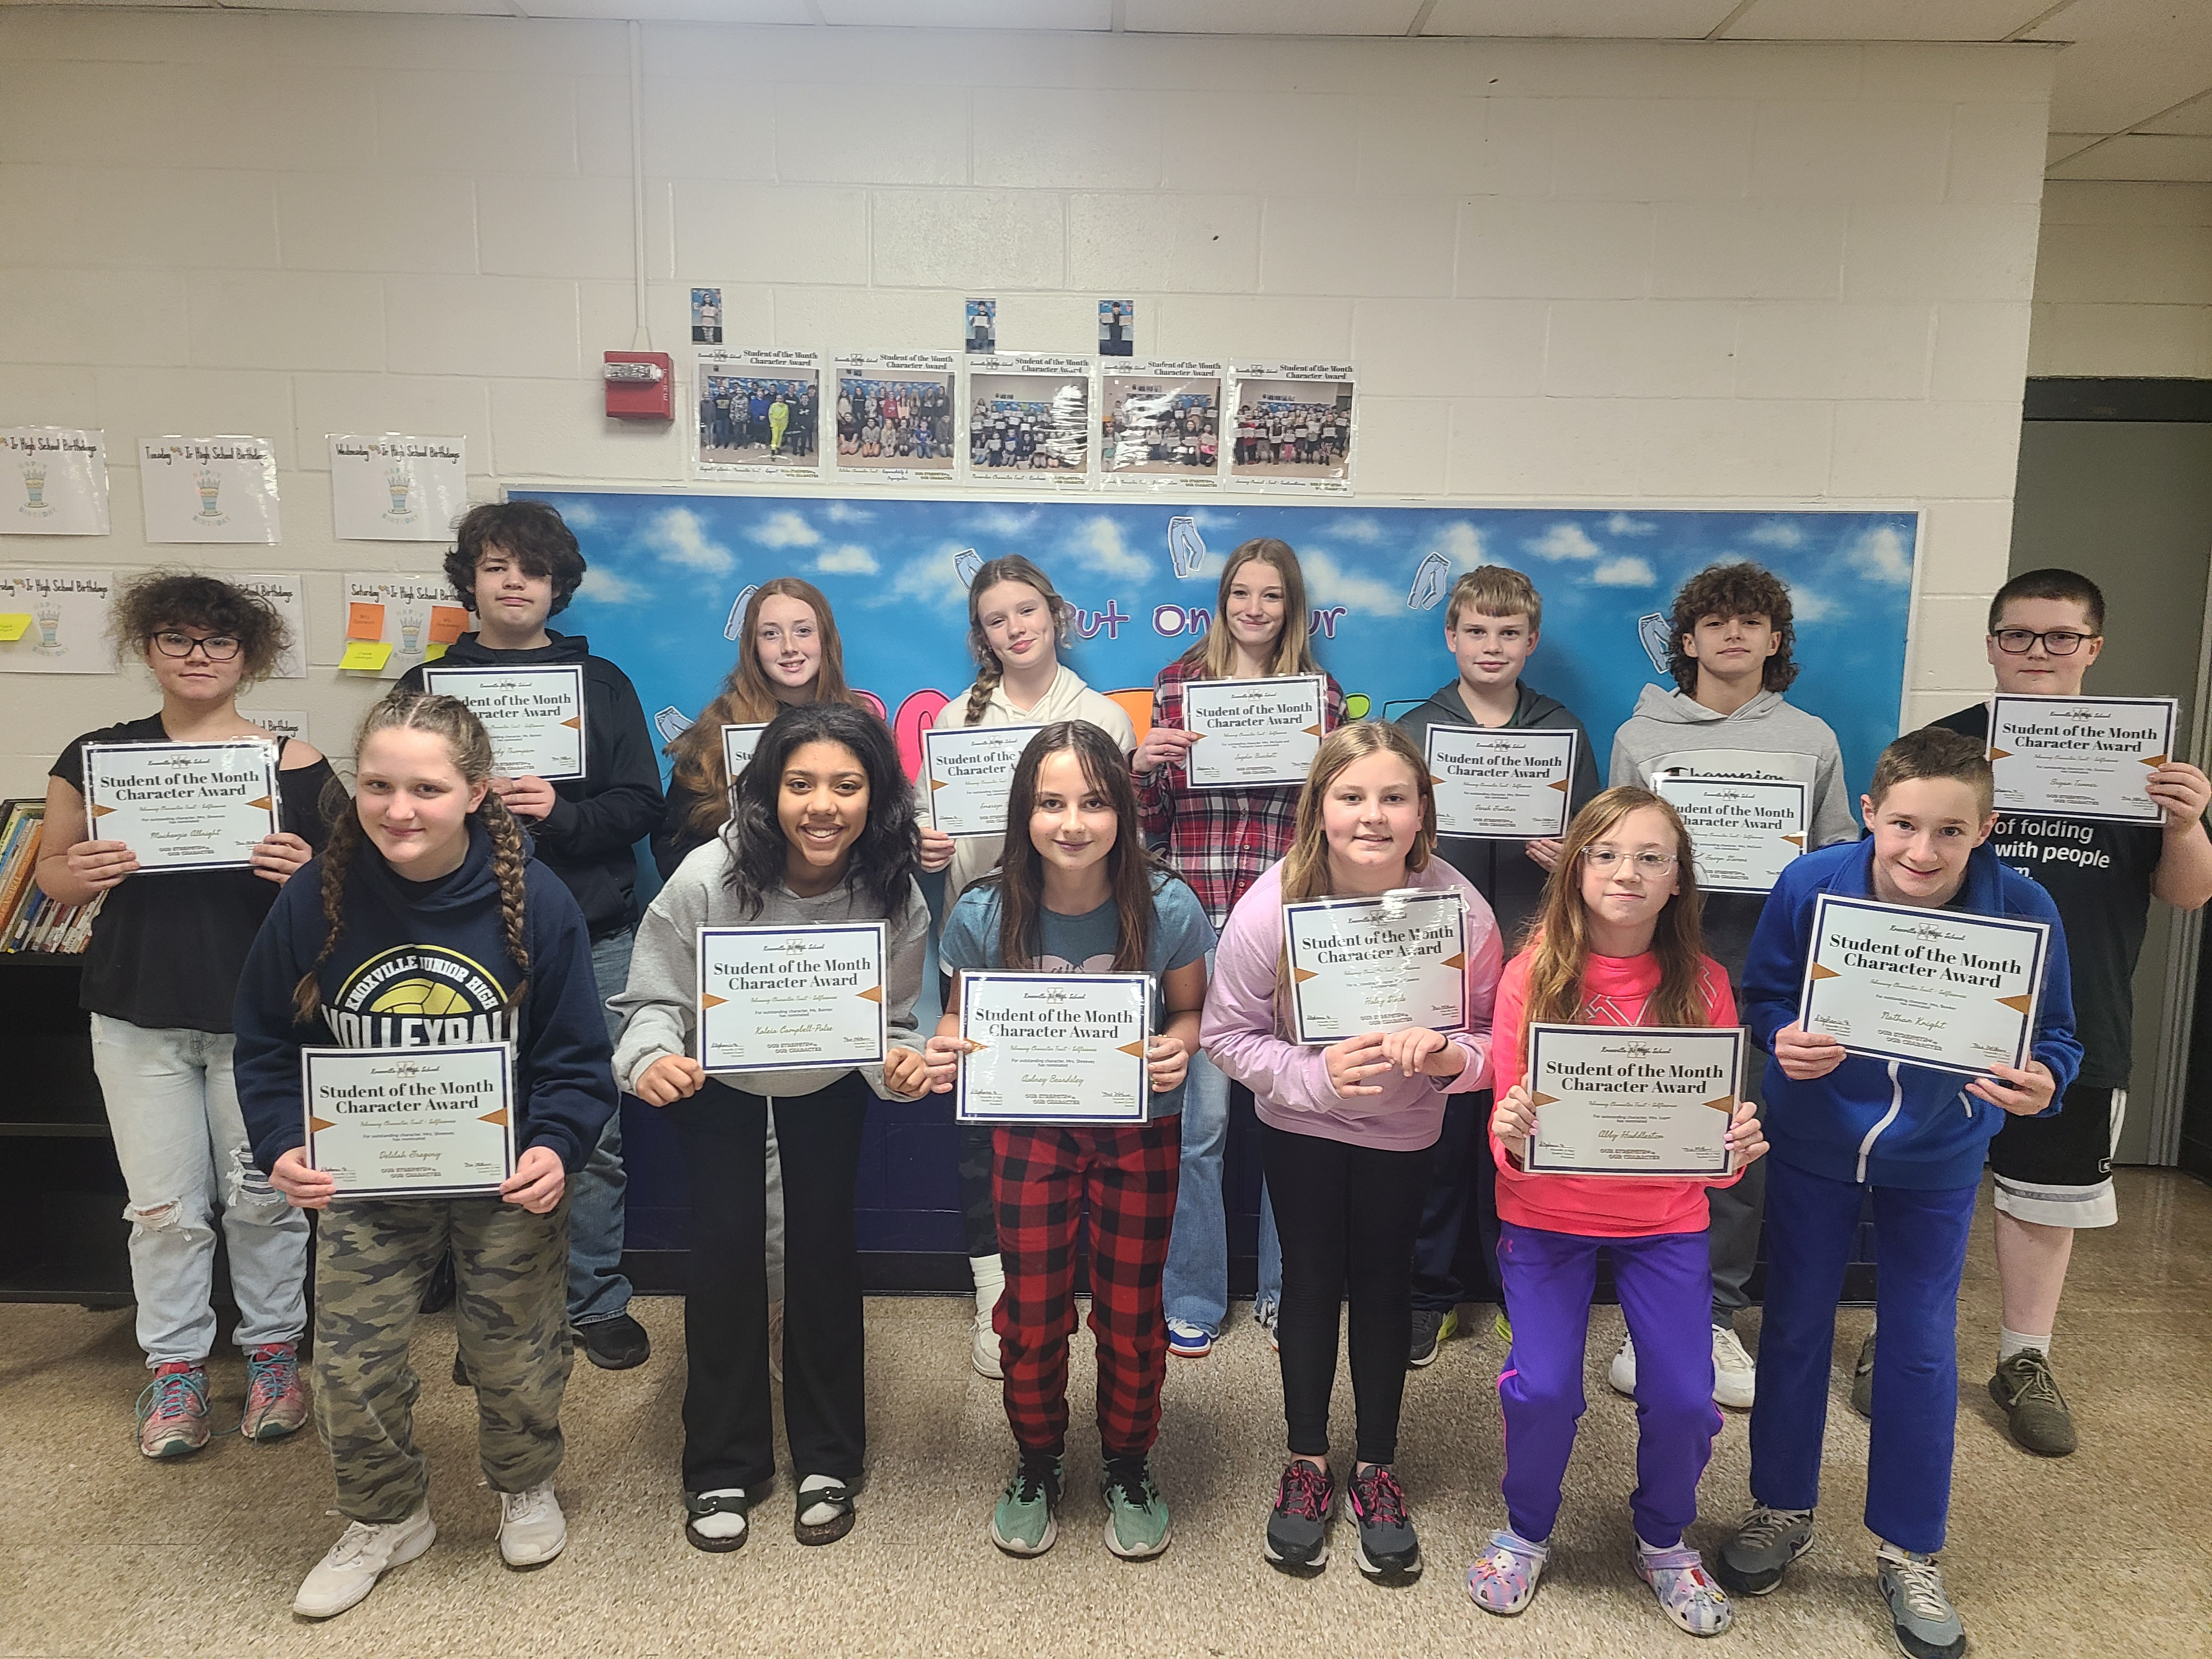 February Students of the Month Character Award for Selflessness